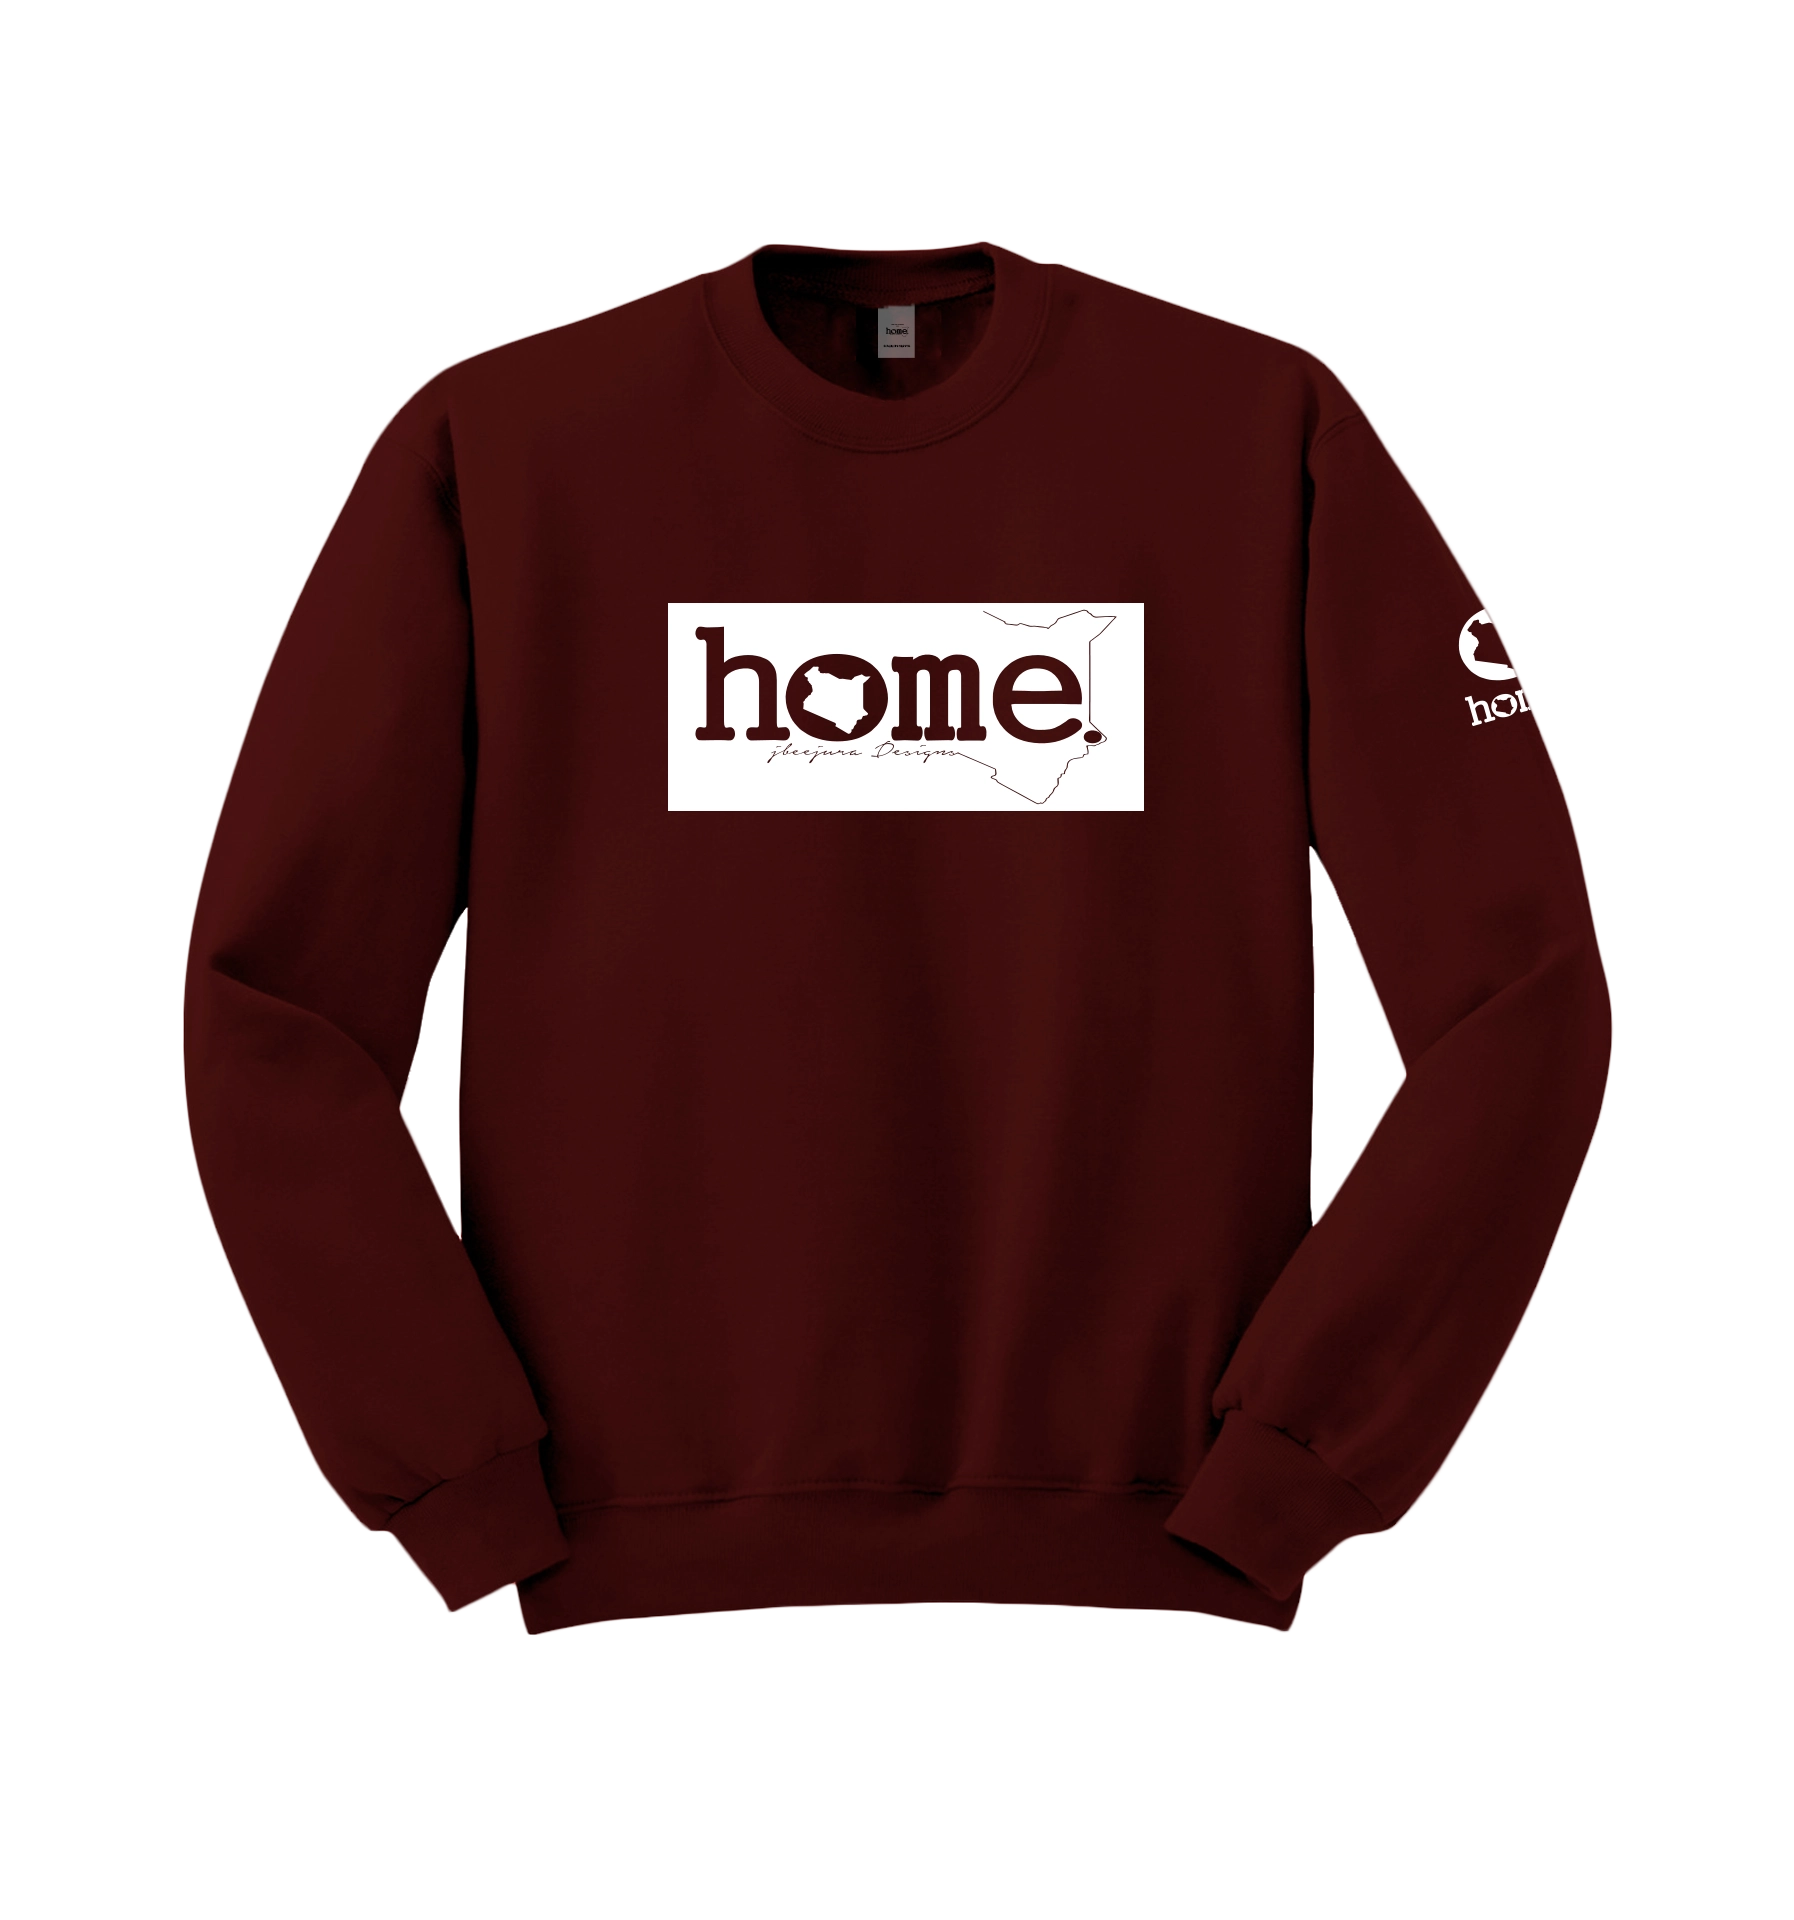 home_254 MAROON SWEATSHIRT (MID-HEAVY FABRIC) WITH A WHITE CLASSIC PRINT